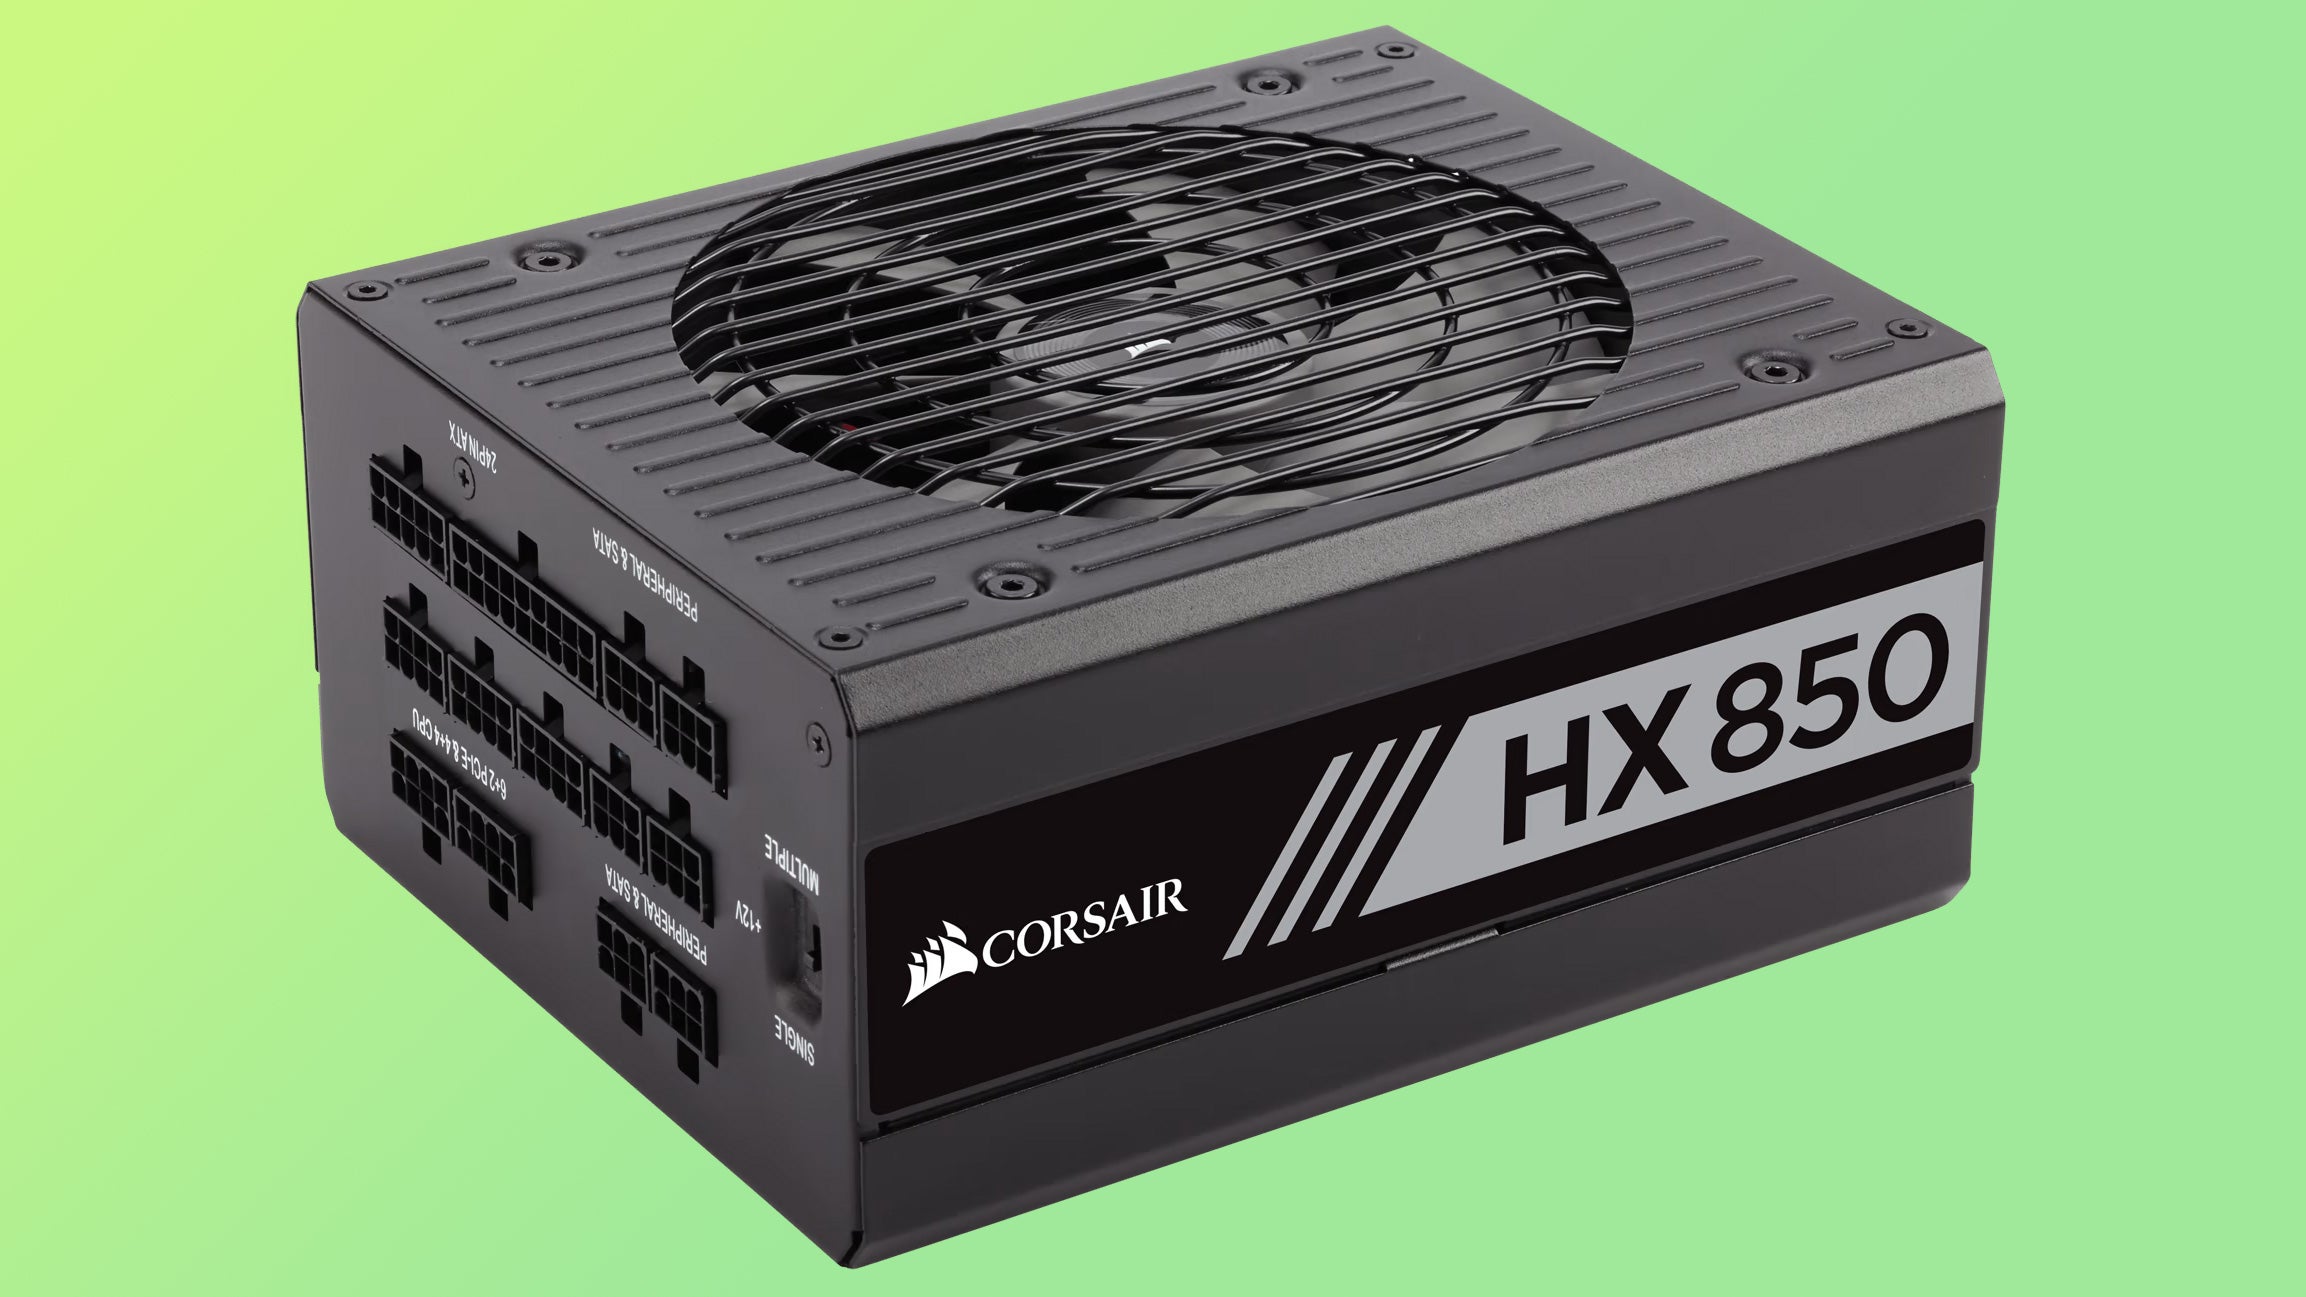 This Corsair power supply can handle the RTX 4090 and is down to